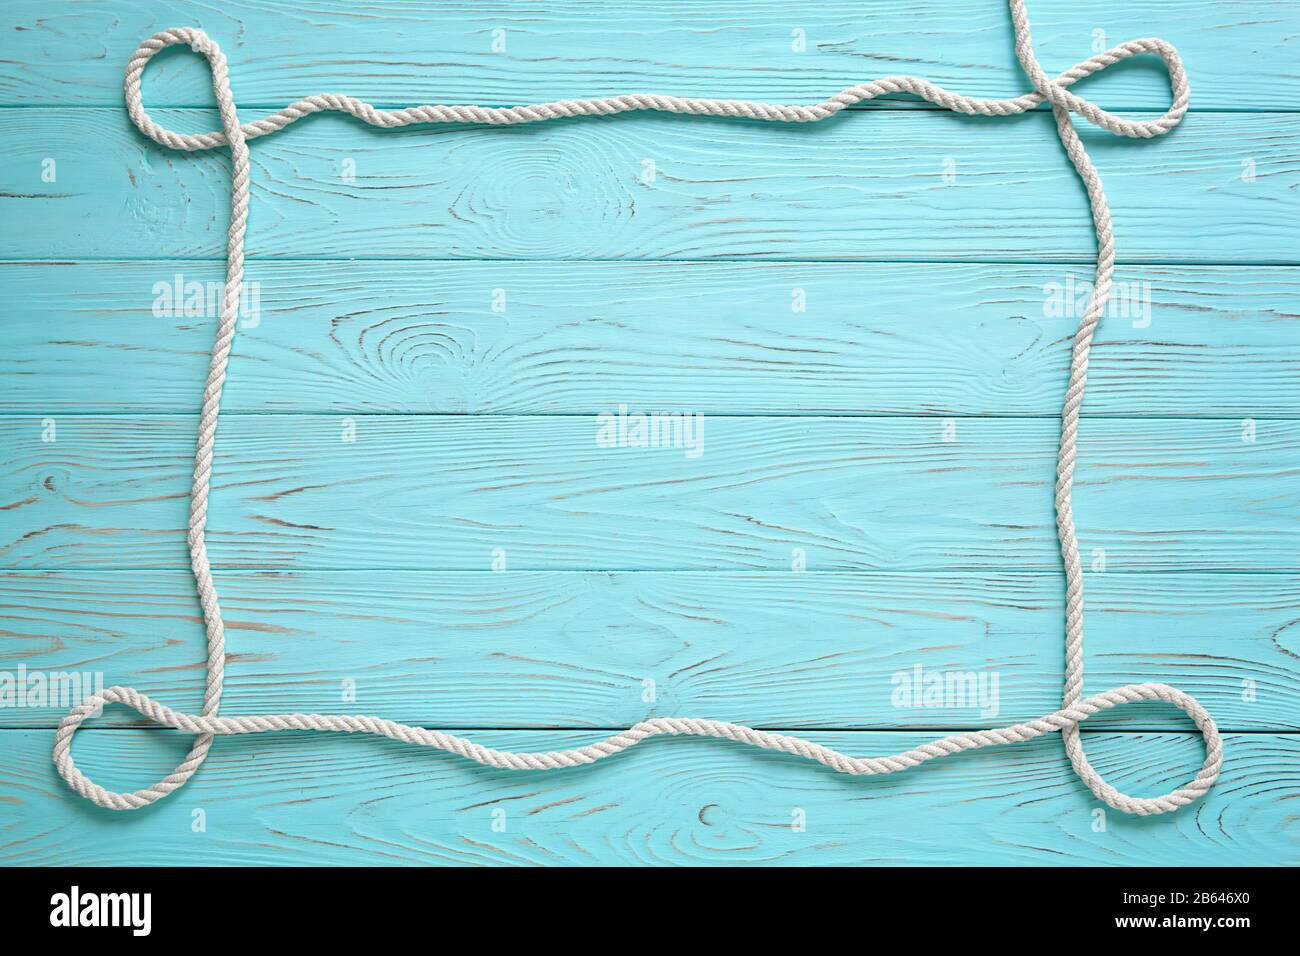 Frame made of white rope on a wooden blue background. Summer time sea vacation concept. Place for your text. Stock Photo